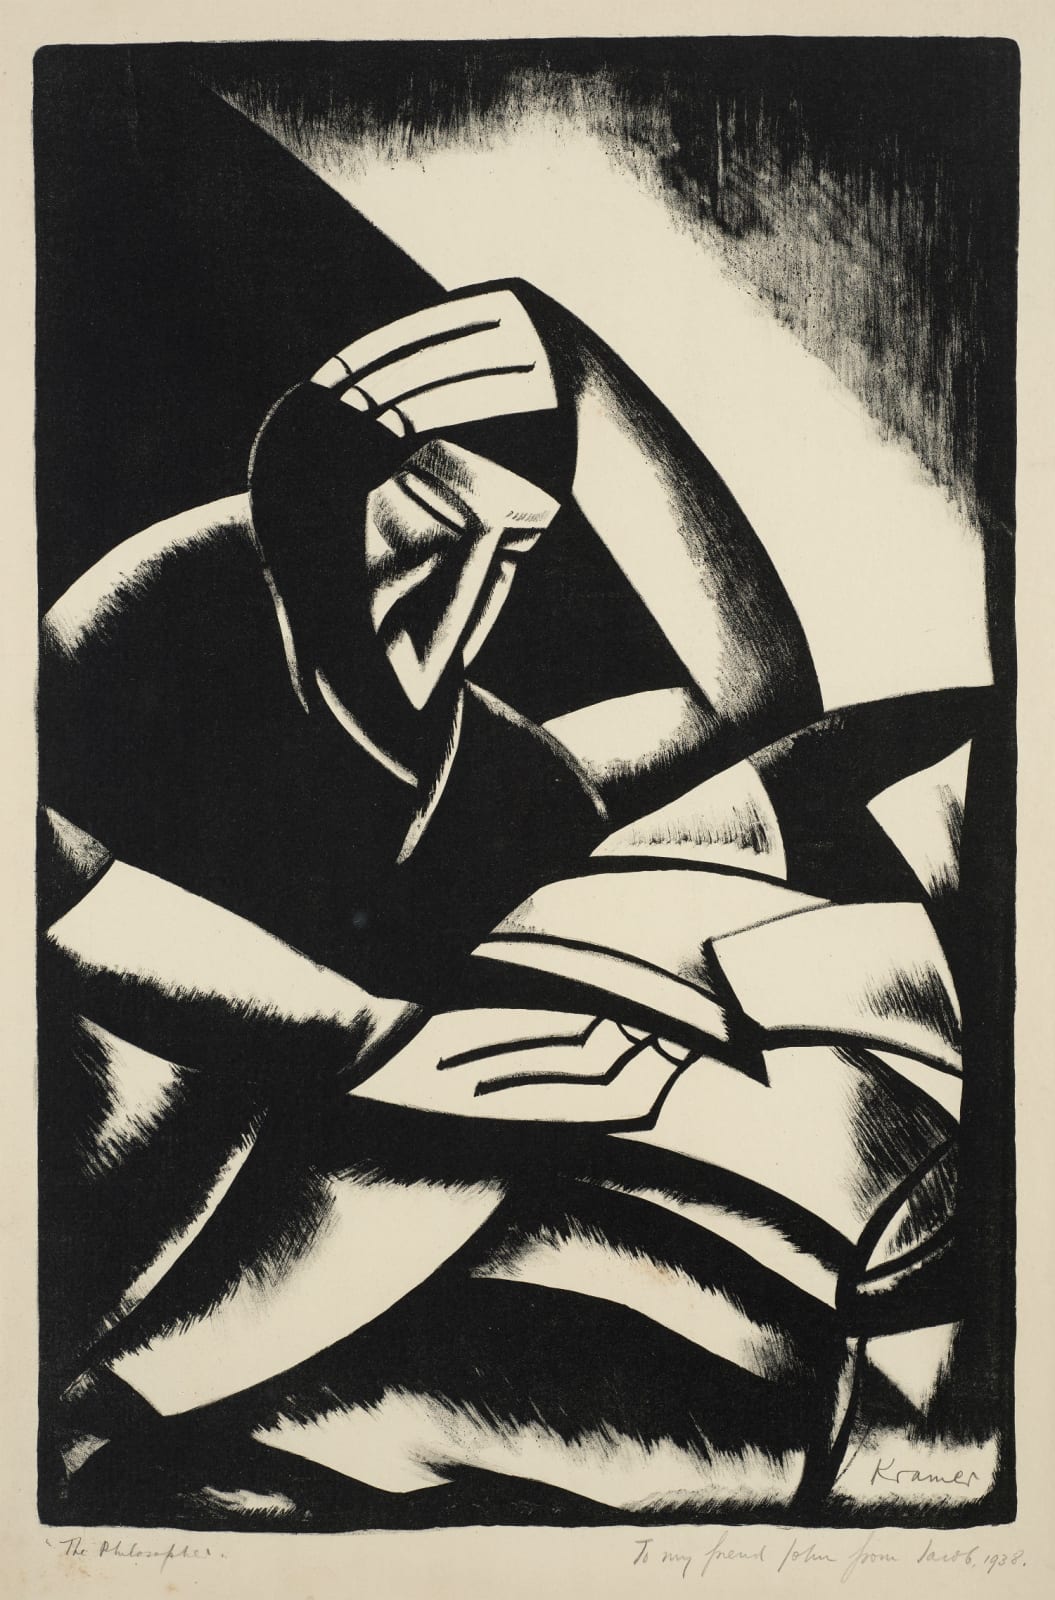 Jacob Kramer (1892-1962) The Philosopher 1922 Lithograph on woven paper 50.3 x 33 cm Ben Uri Collection © The William Roberts Society, London